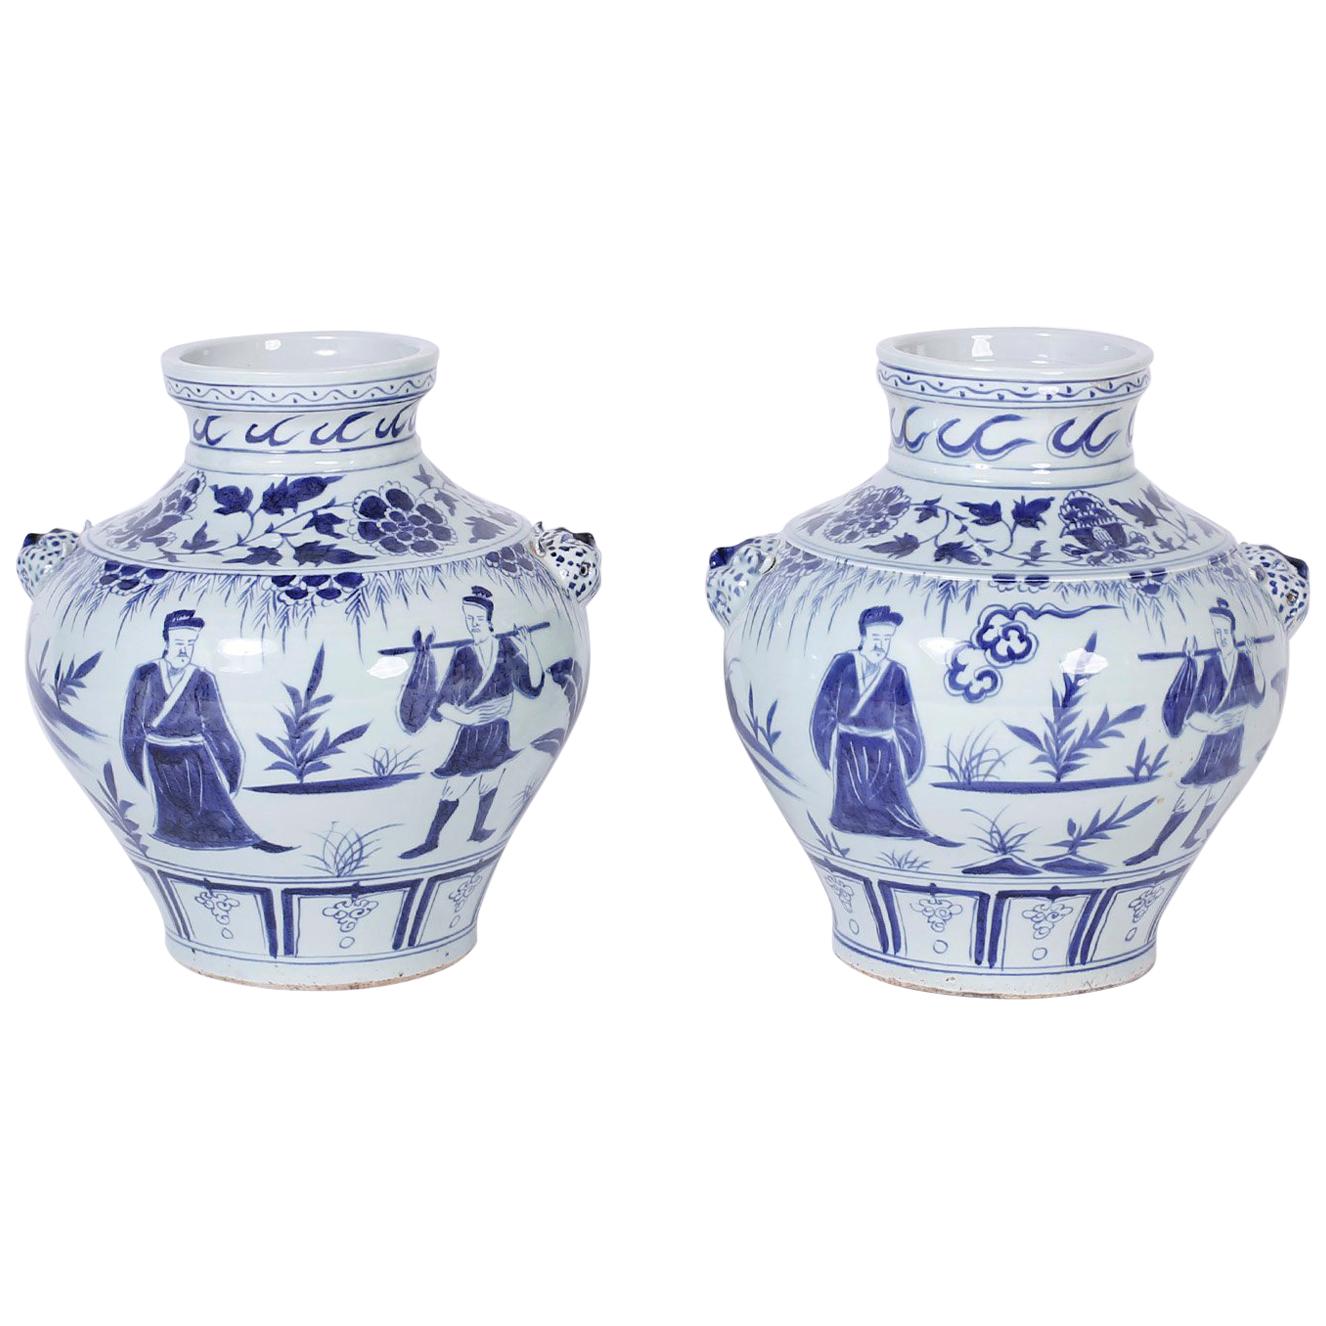 Pair of Blue and White Chinese Porcelain Urns or Vases